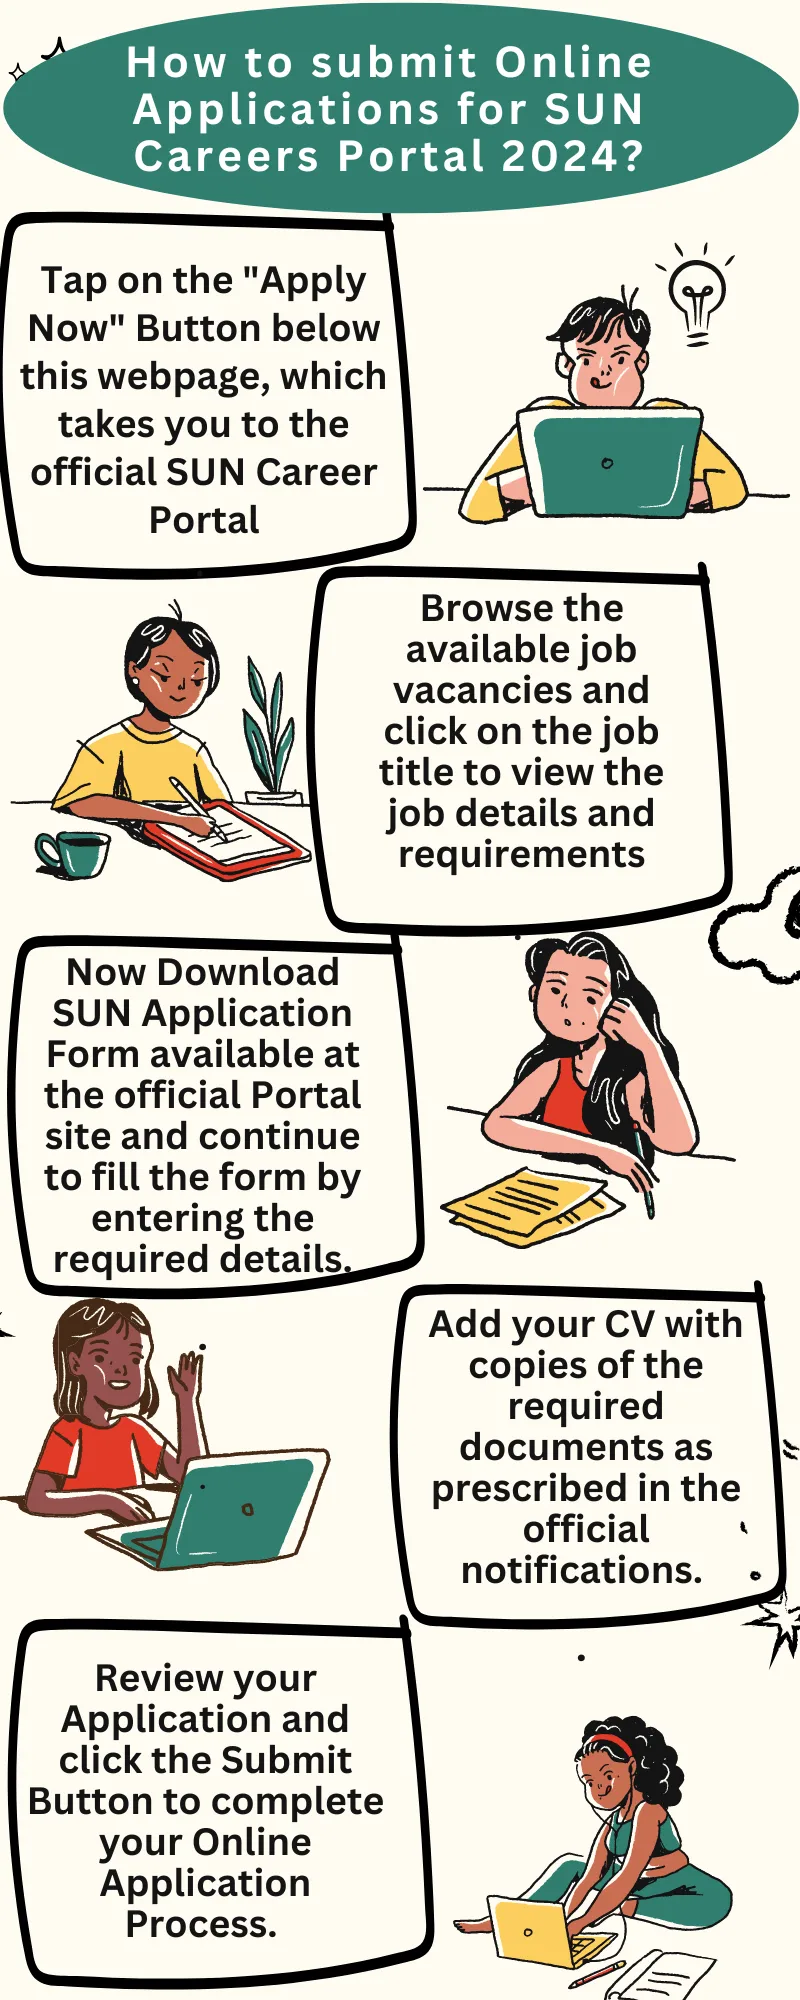 How to submit Online Applications for SUN Careers Portal 2024